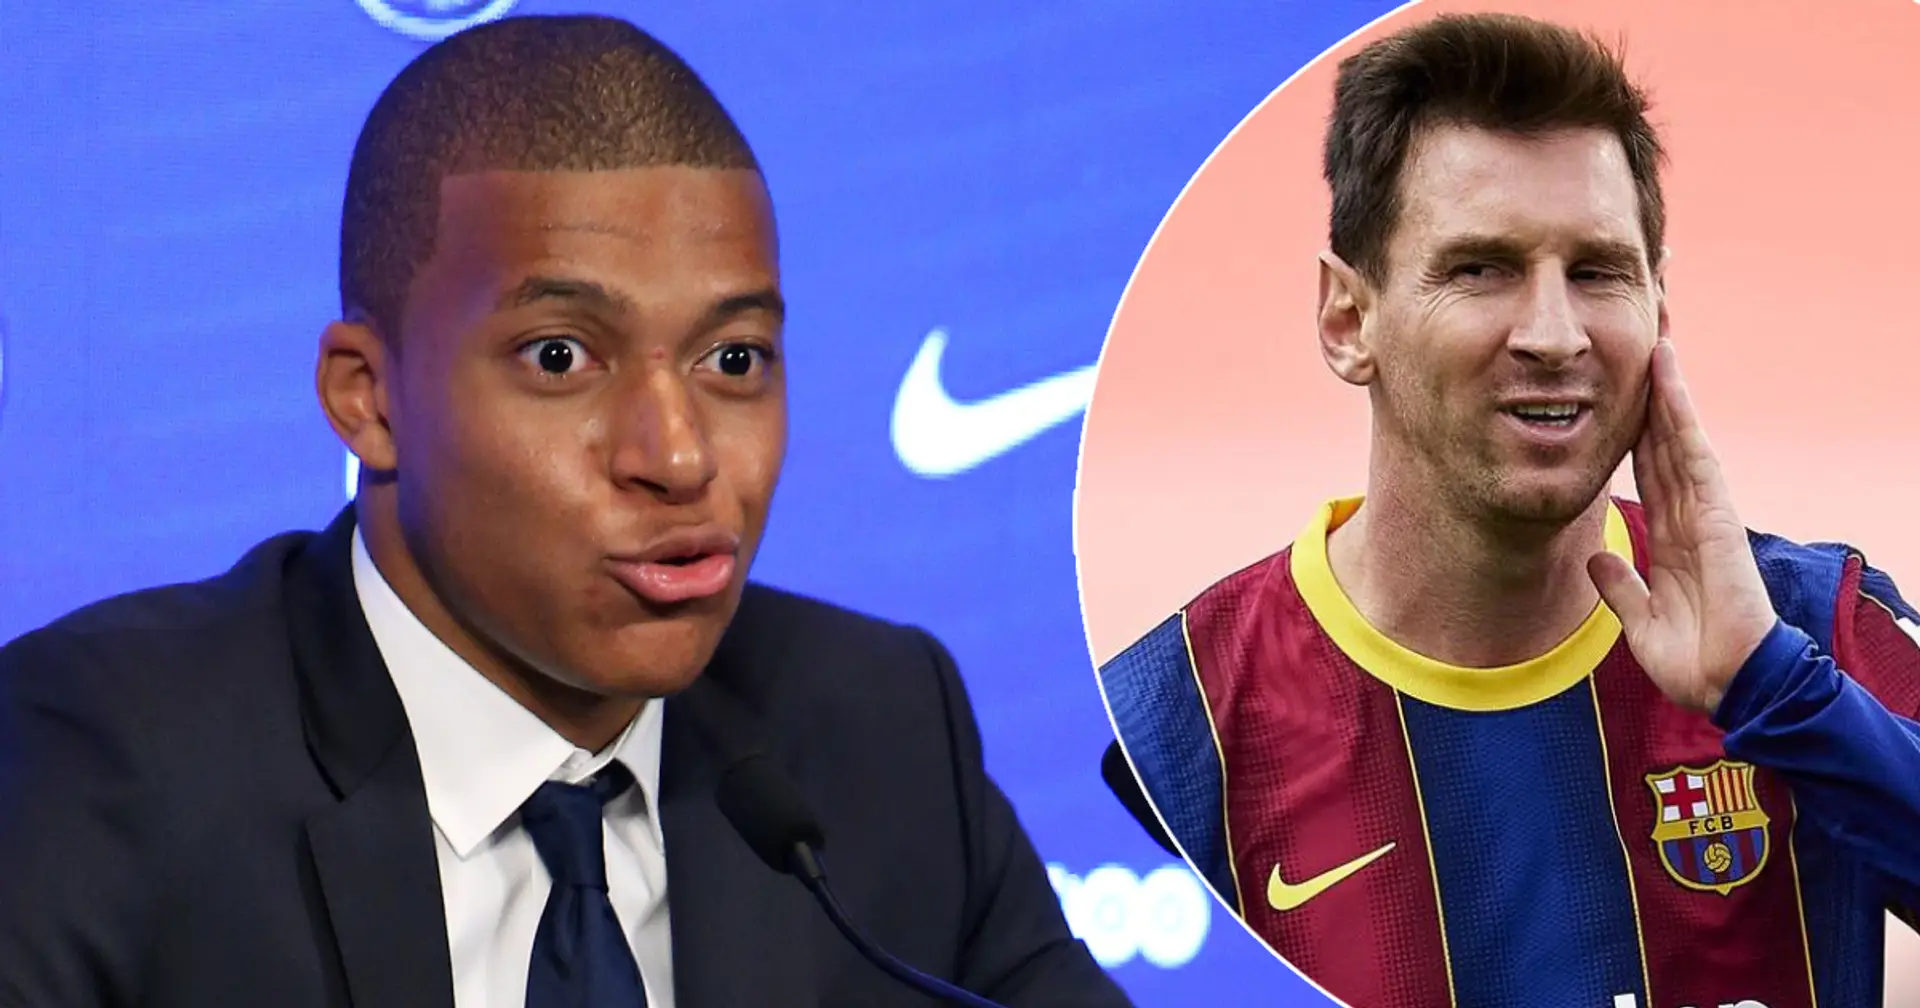 Kylian Mbappe states one reason why he'll love to read a Messi interview